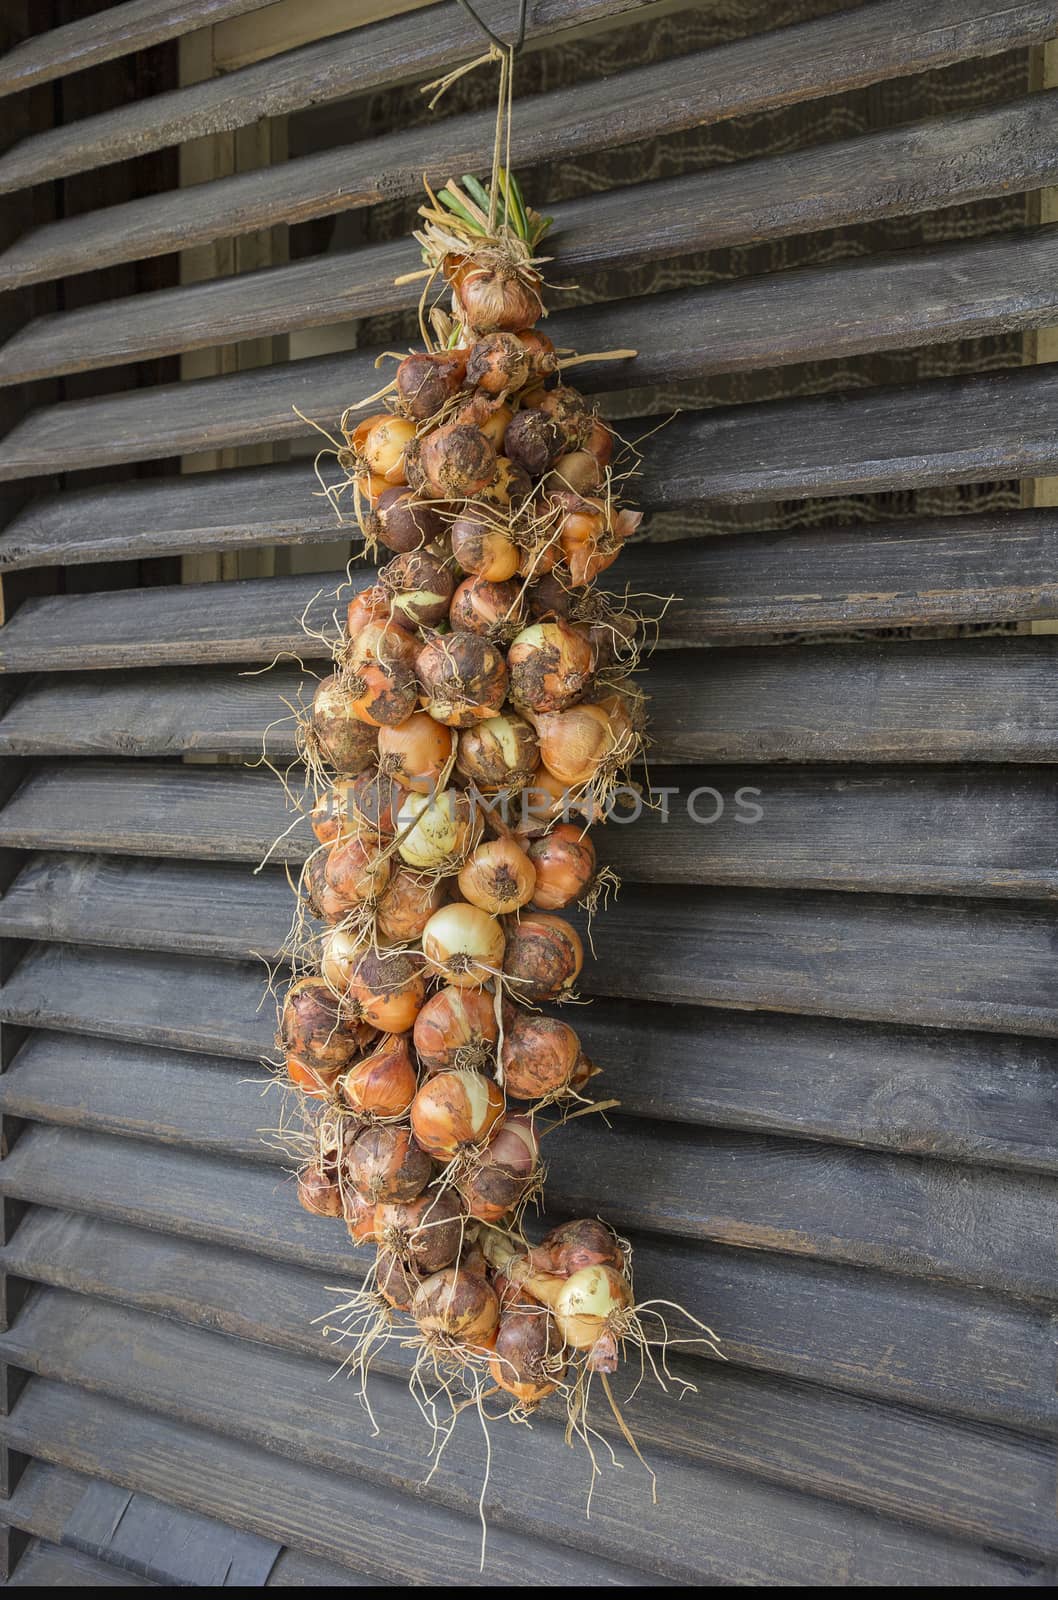 Bunches of yellow onions hanging and drying outside a rustic window.